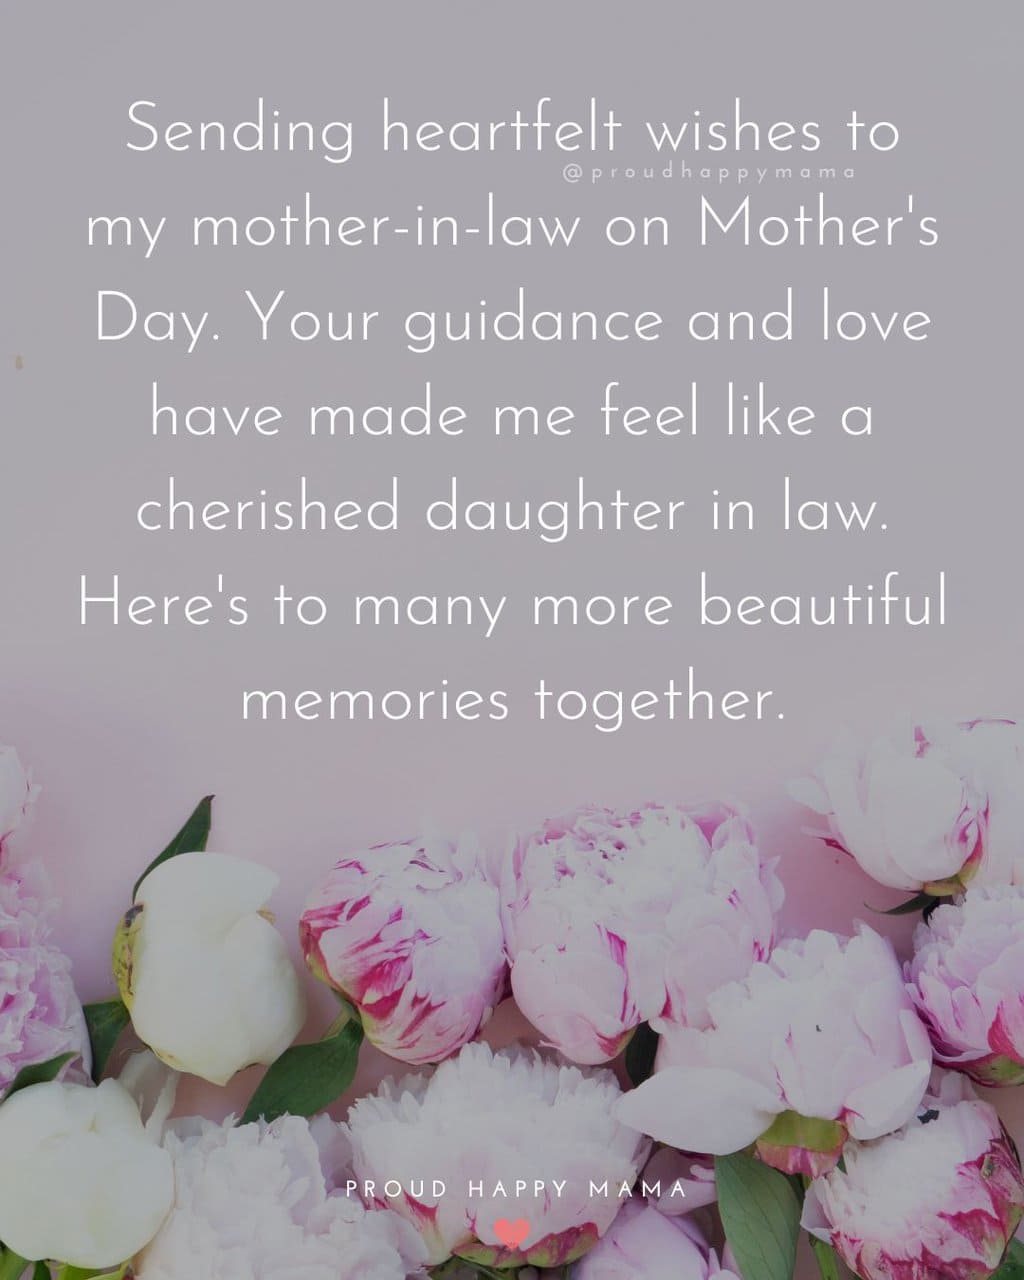 mother's day quotes from daughter-in-law